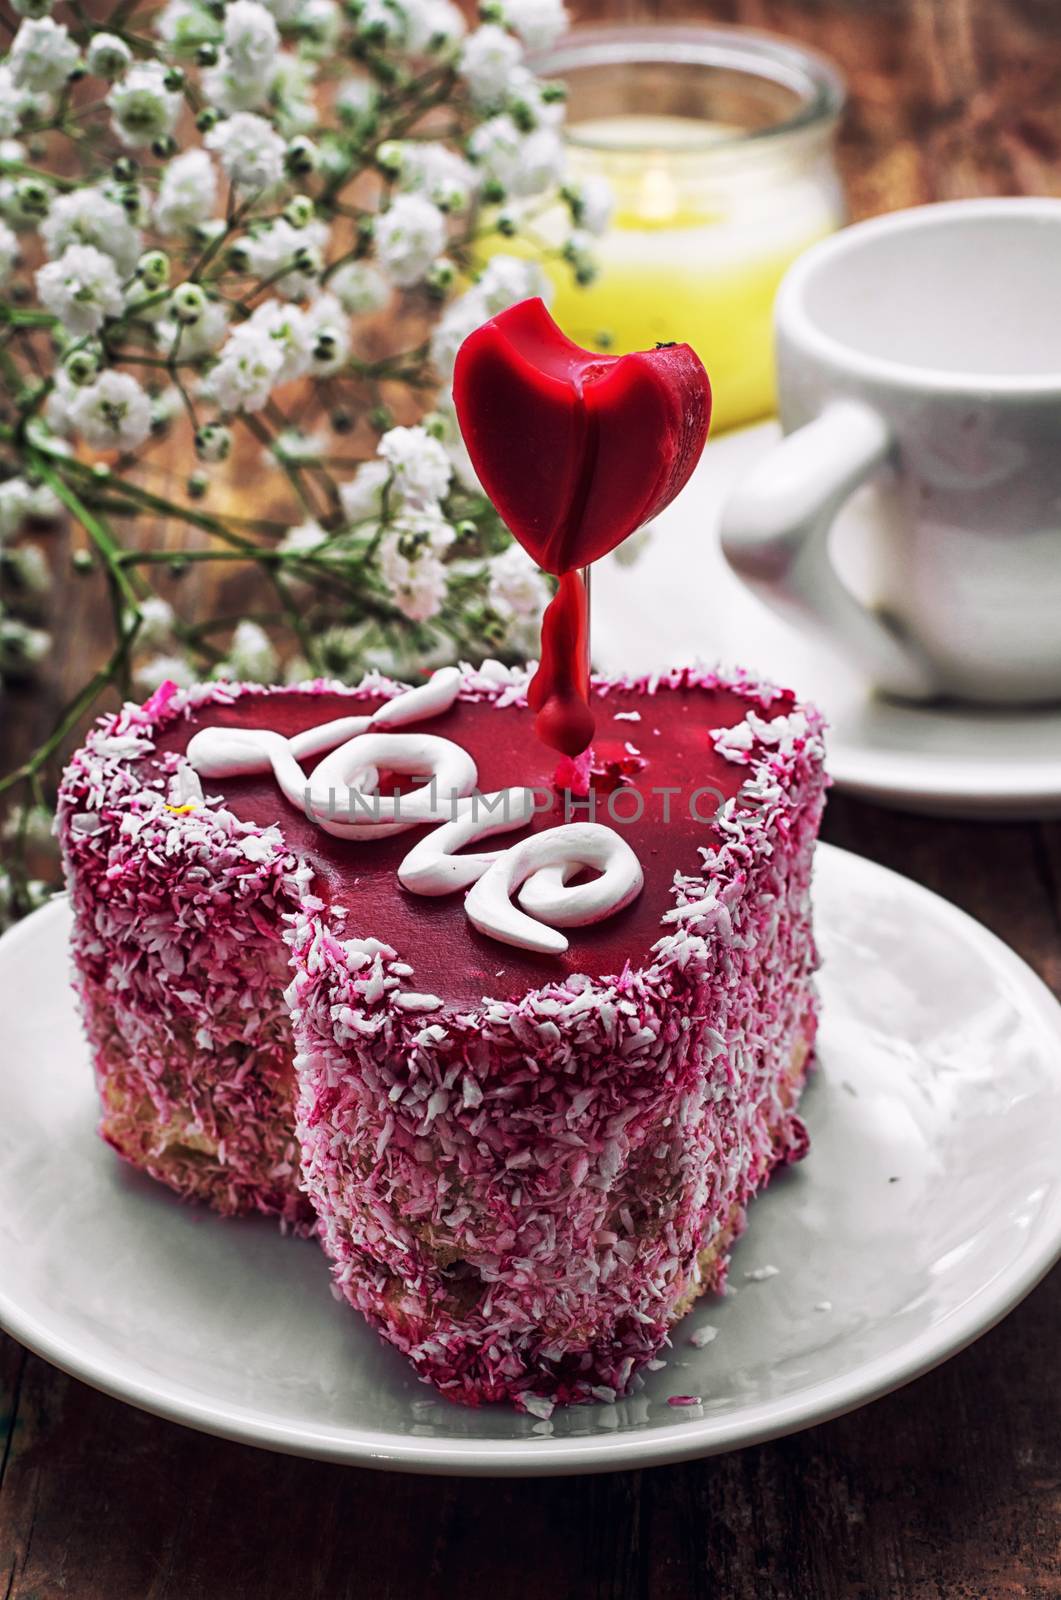 cake with fruit filling in the shape of heart with the inscription love